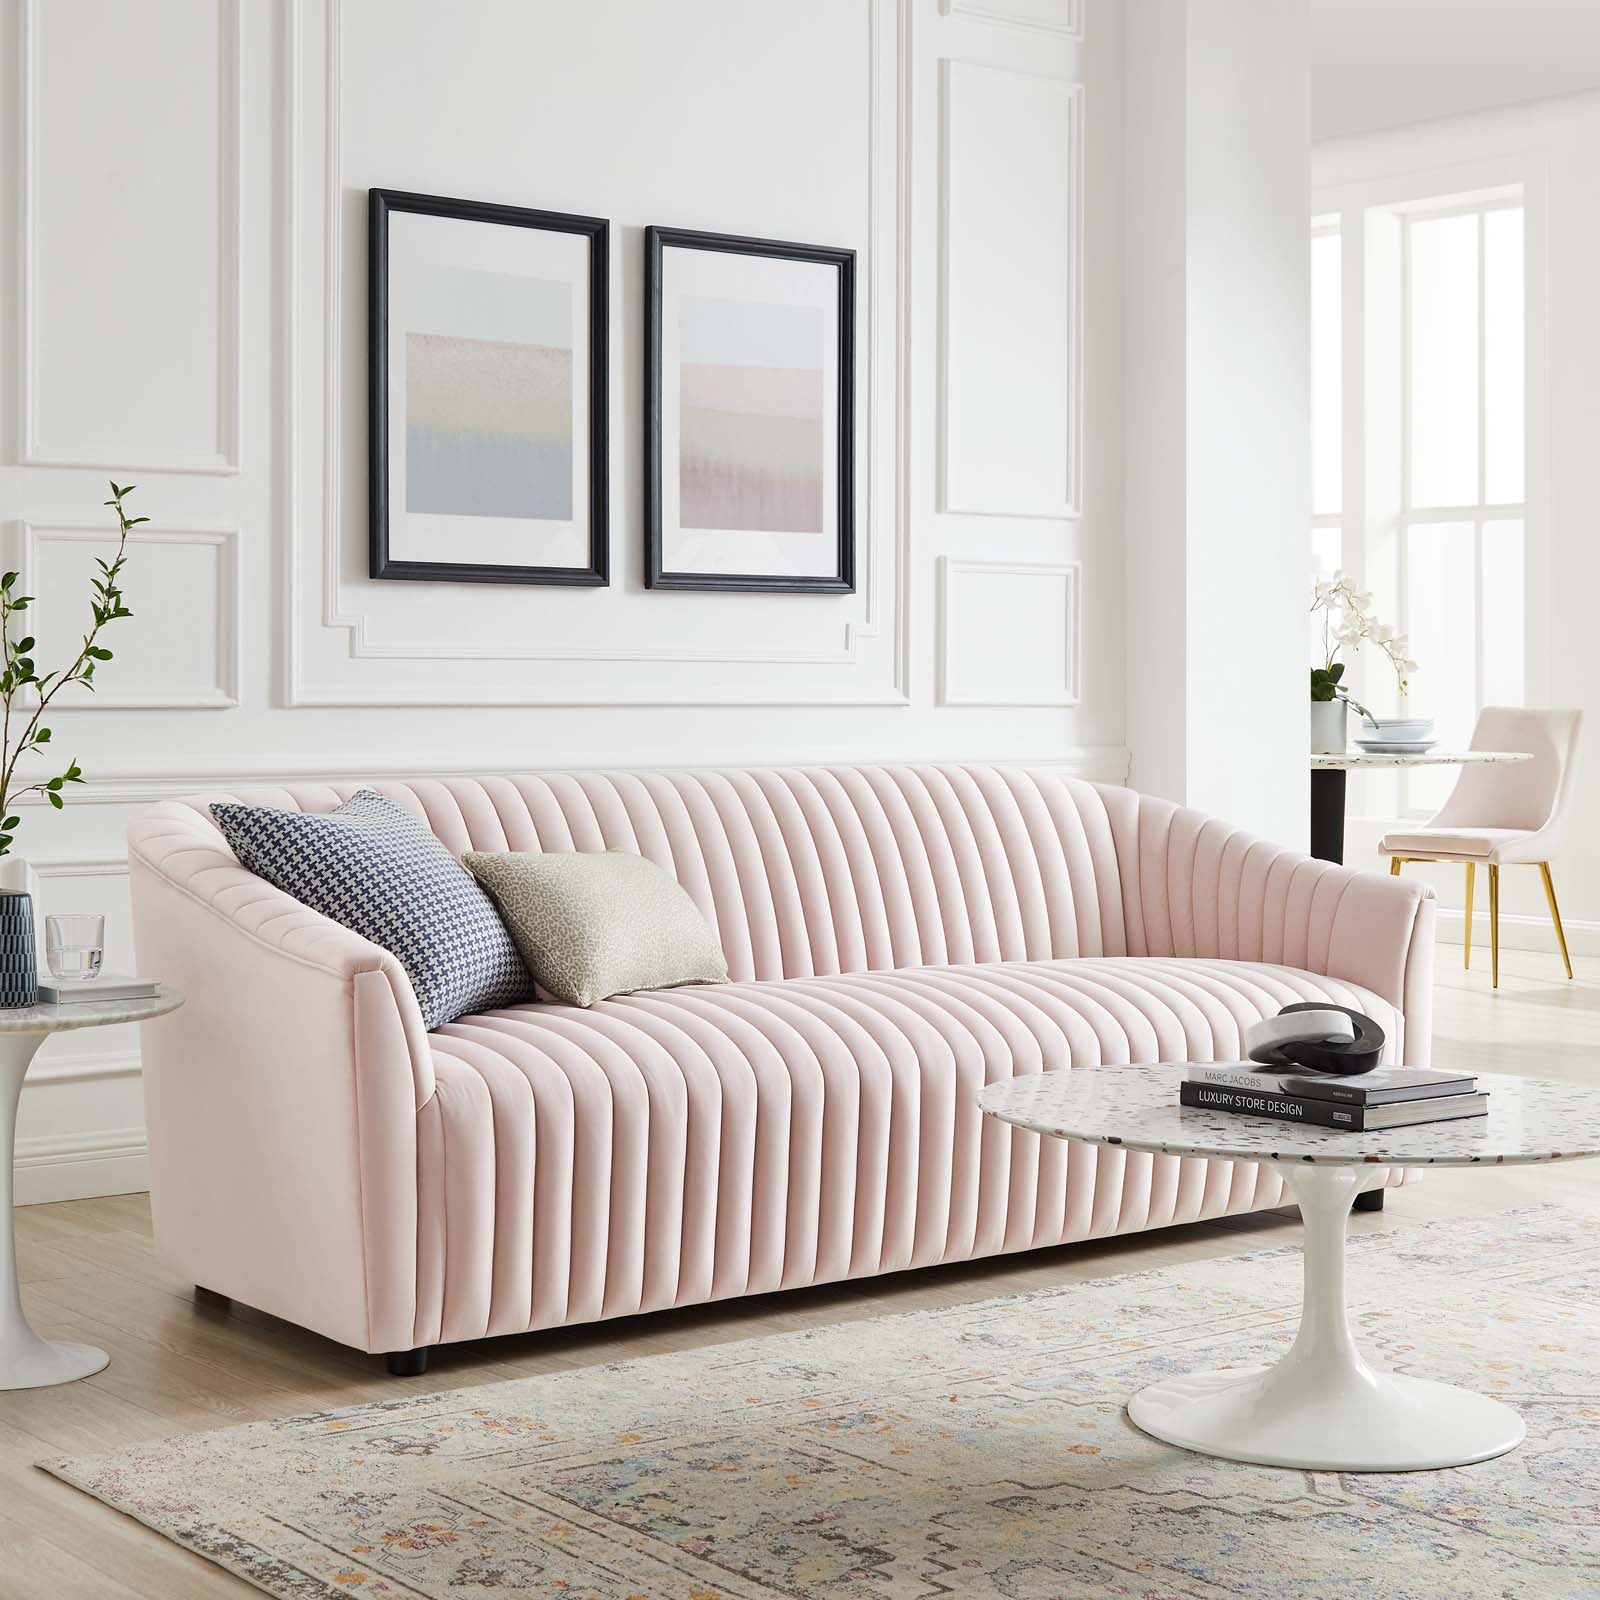 Modway Sofas & Couches - Announce Performance Velvet Channel Tufted Sofa Pink